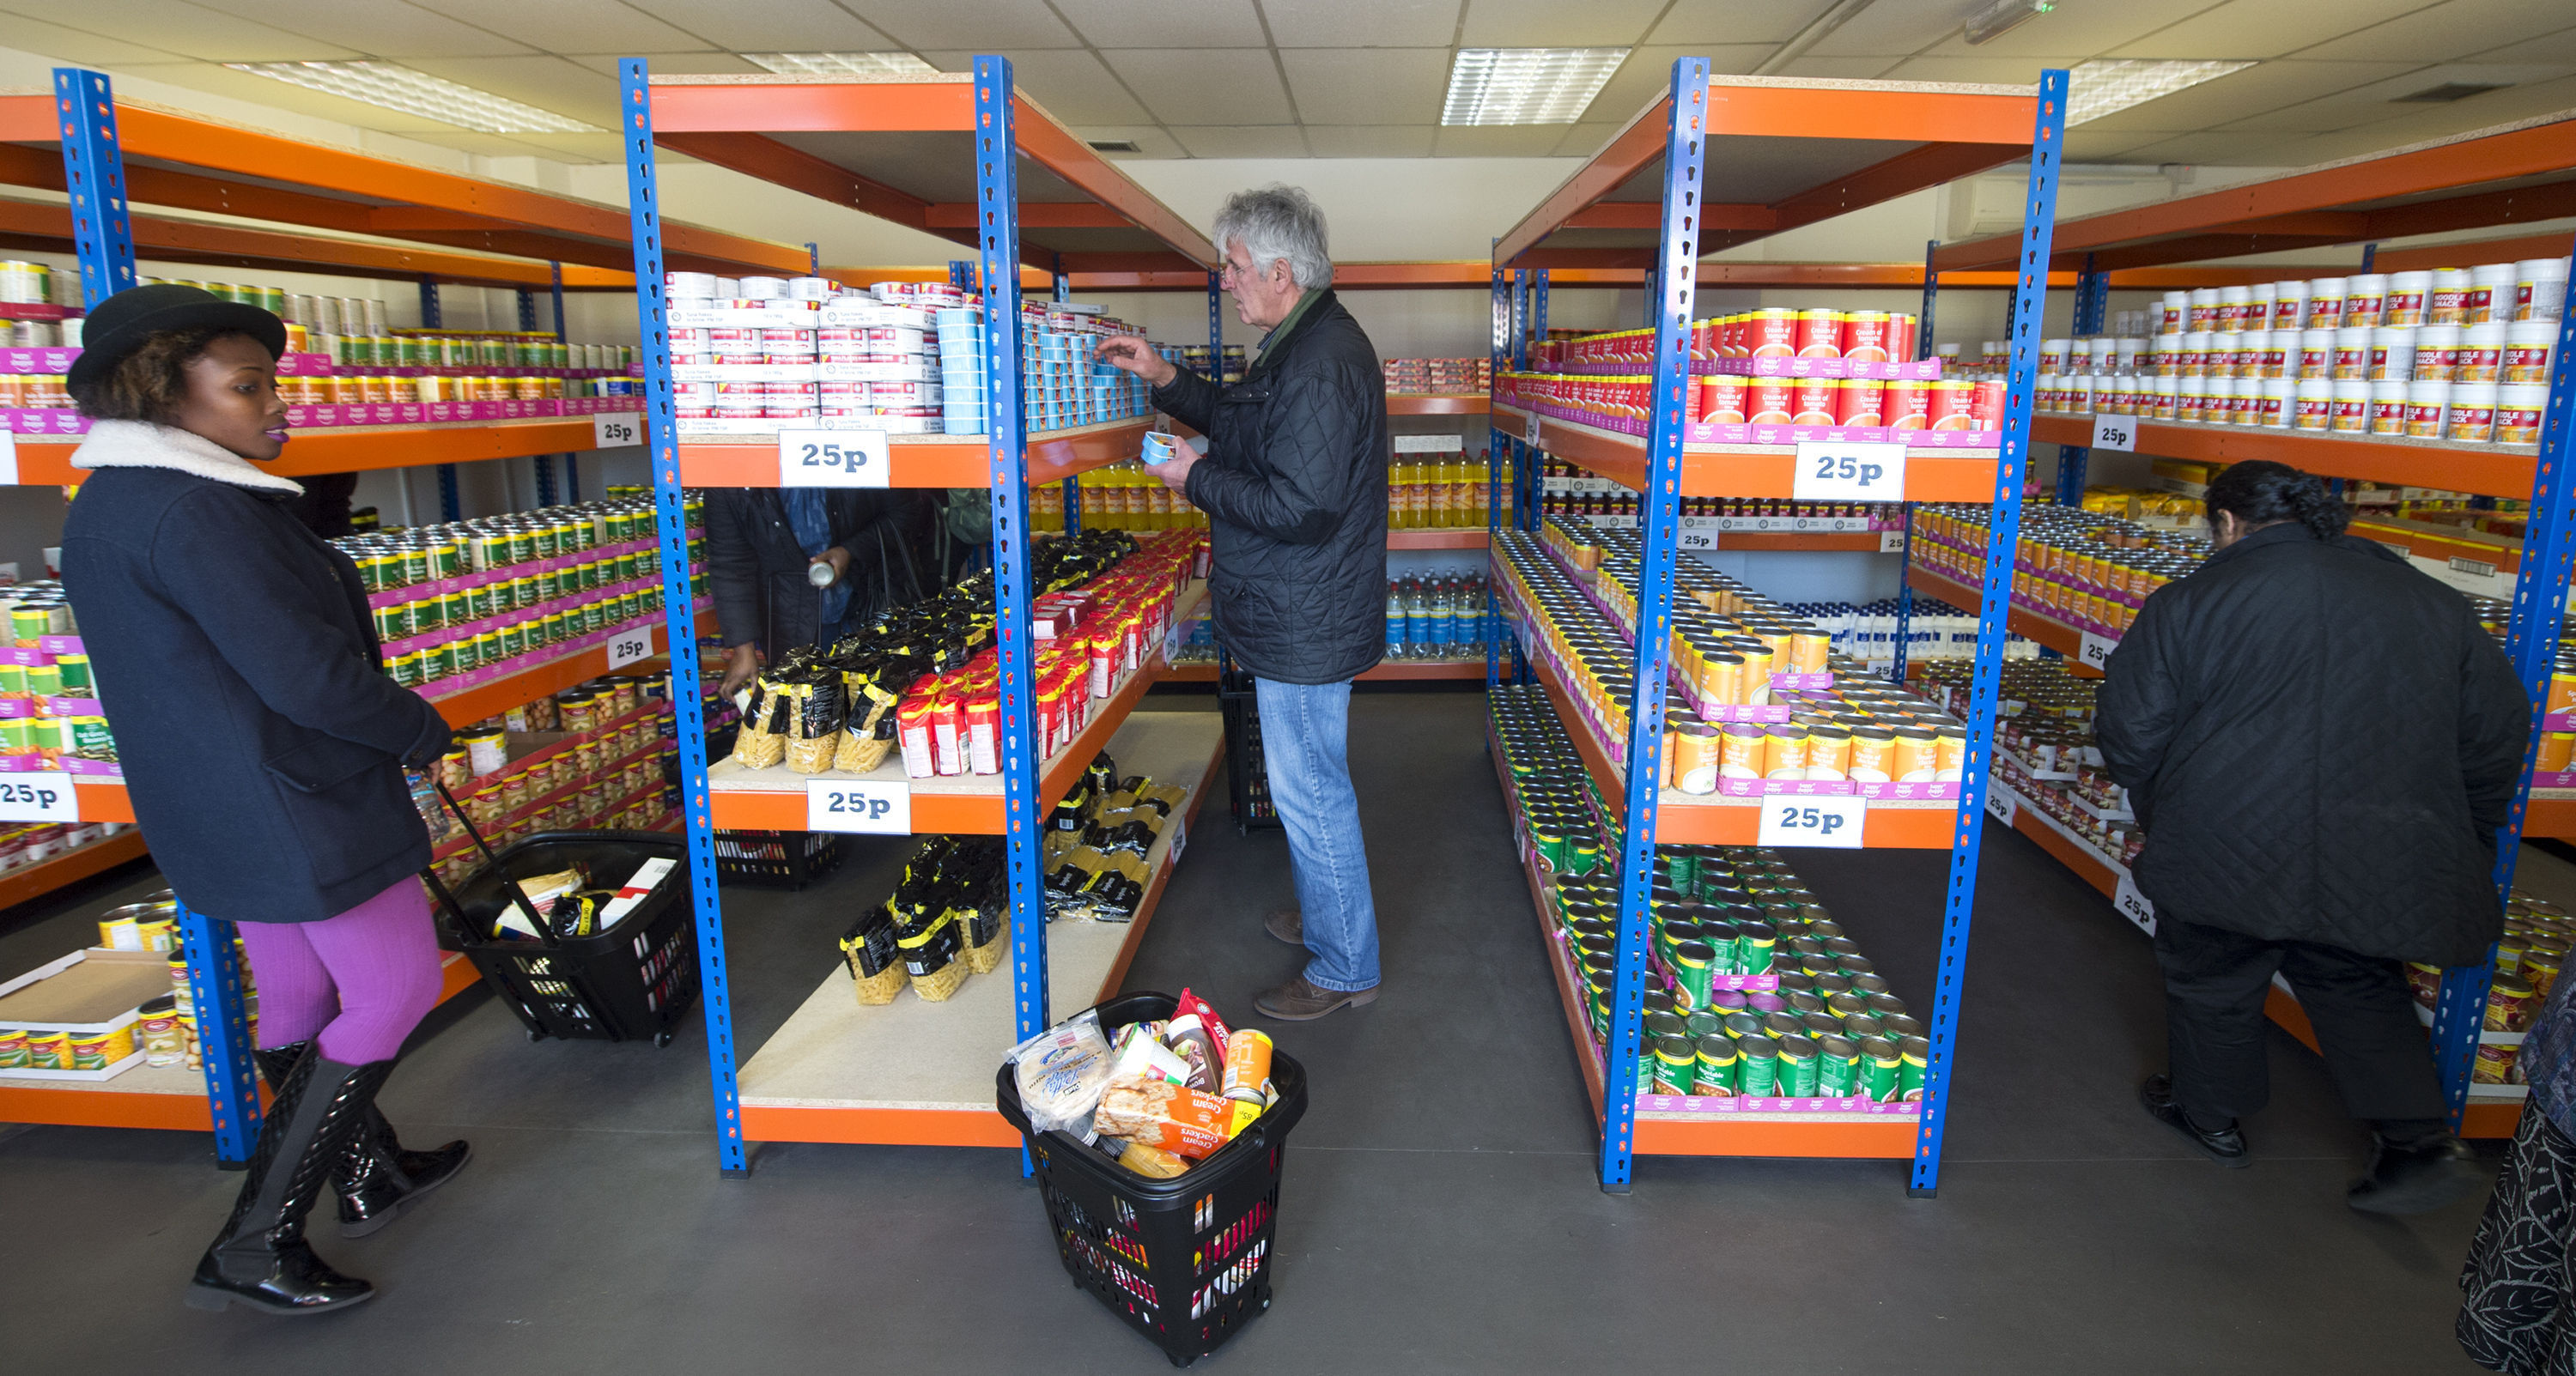 Shoppers buy items for 25p in a new easyFoodstore (Anthony Devlin/PA Wire)